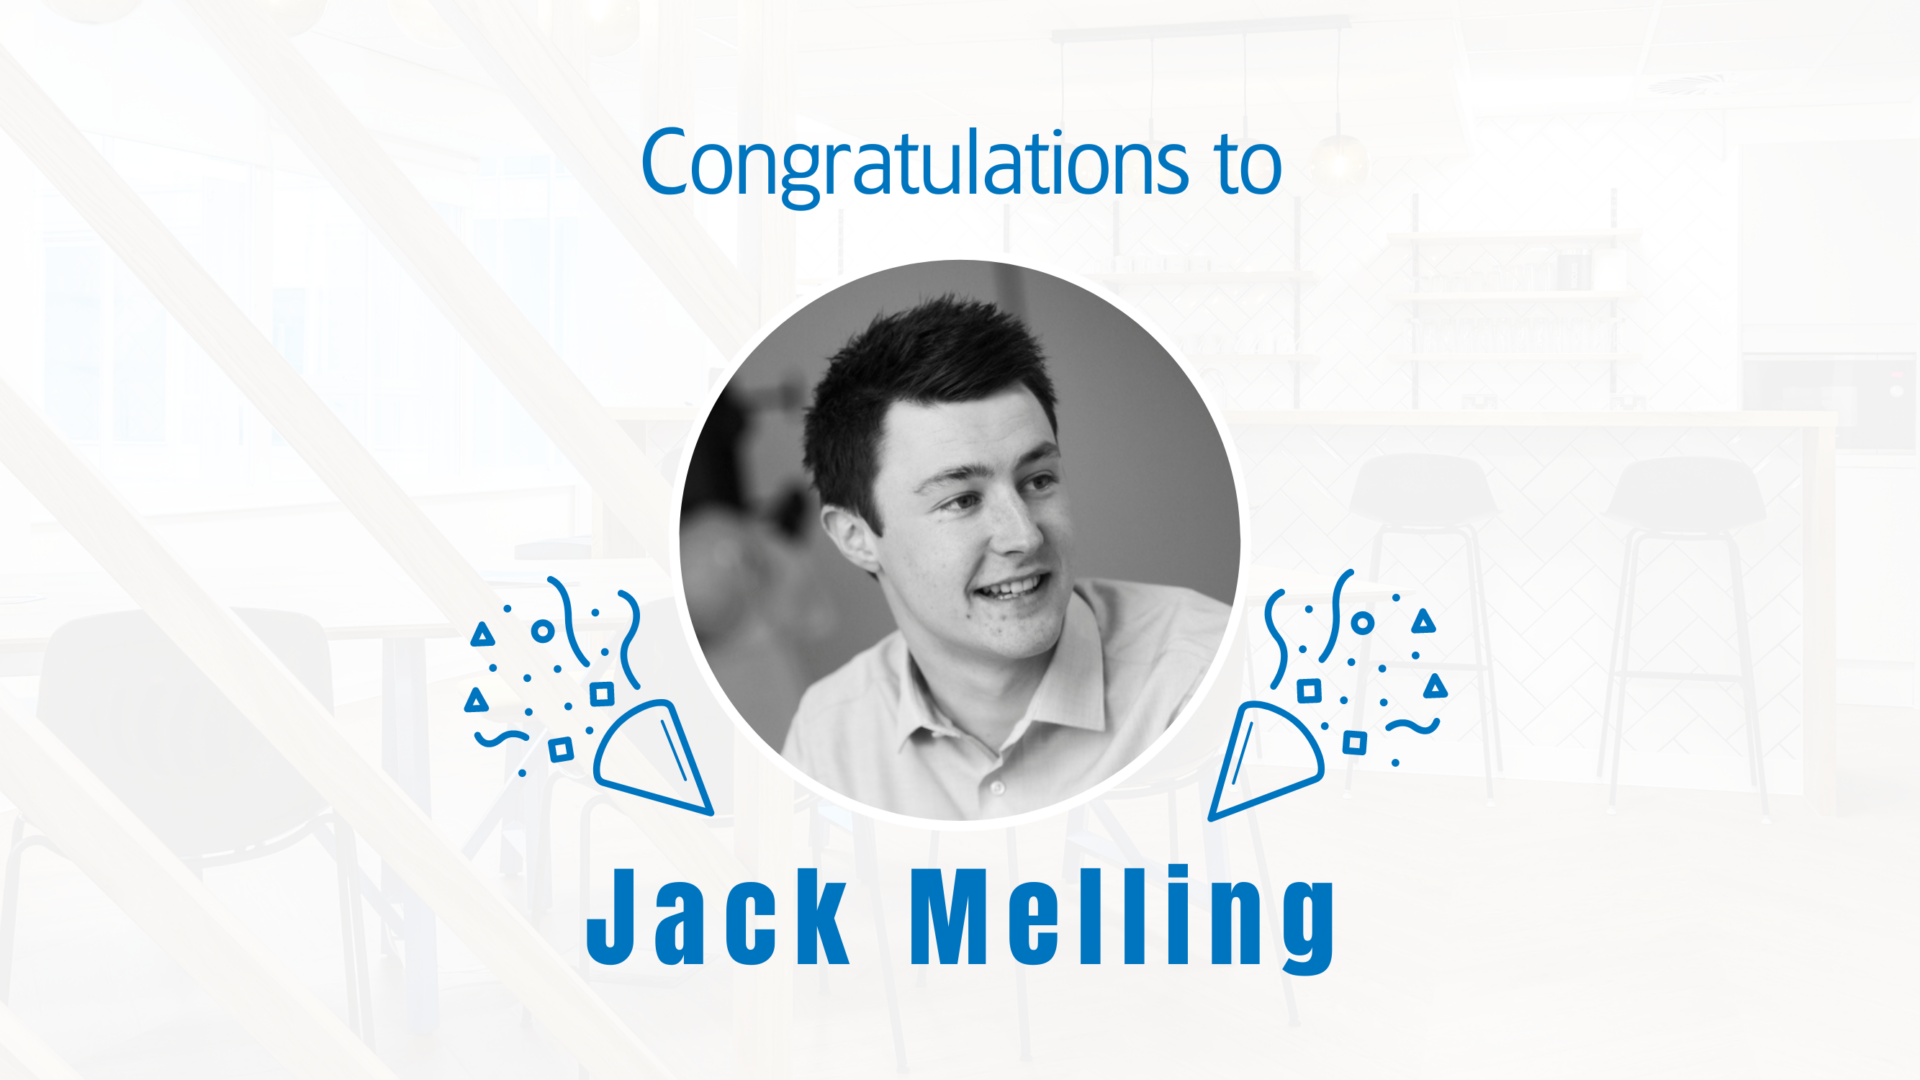 Congratulations to Jack Melling